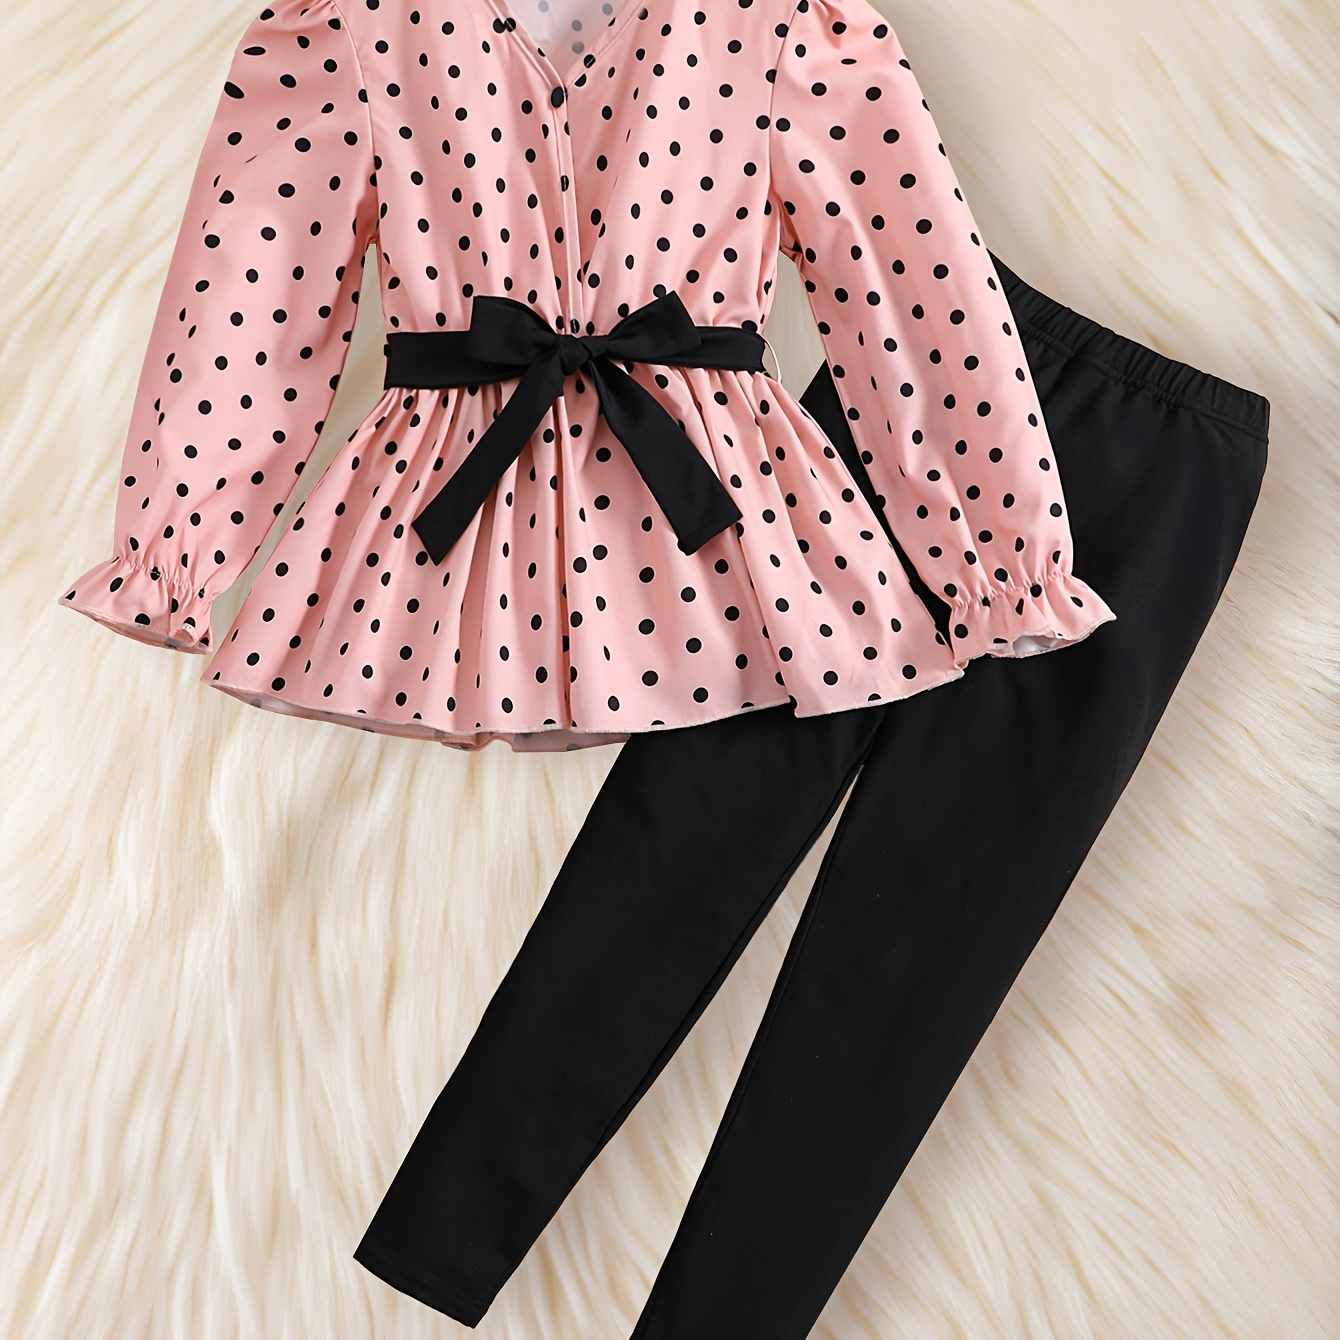 

Classy Girl's 2pcs, Polka Dots Print V-neck Blouse Top + Solid Leggings Set Casual 2-piece Summer Outfit